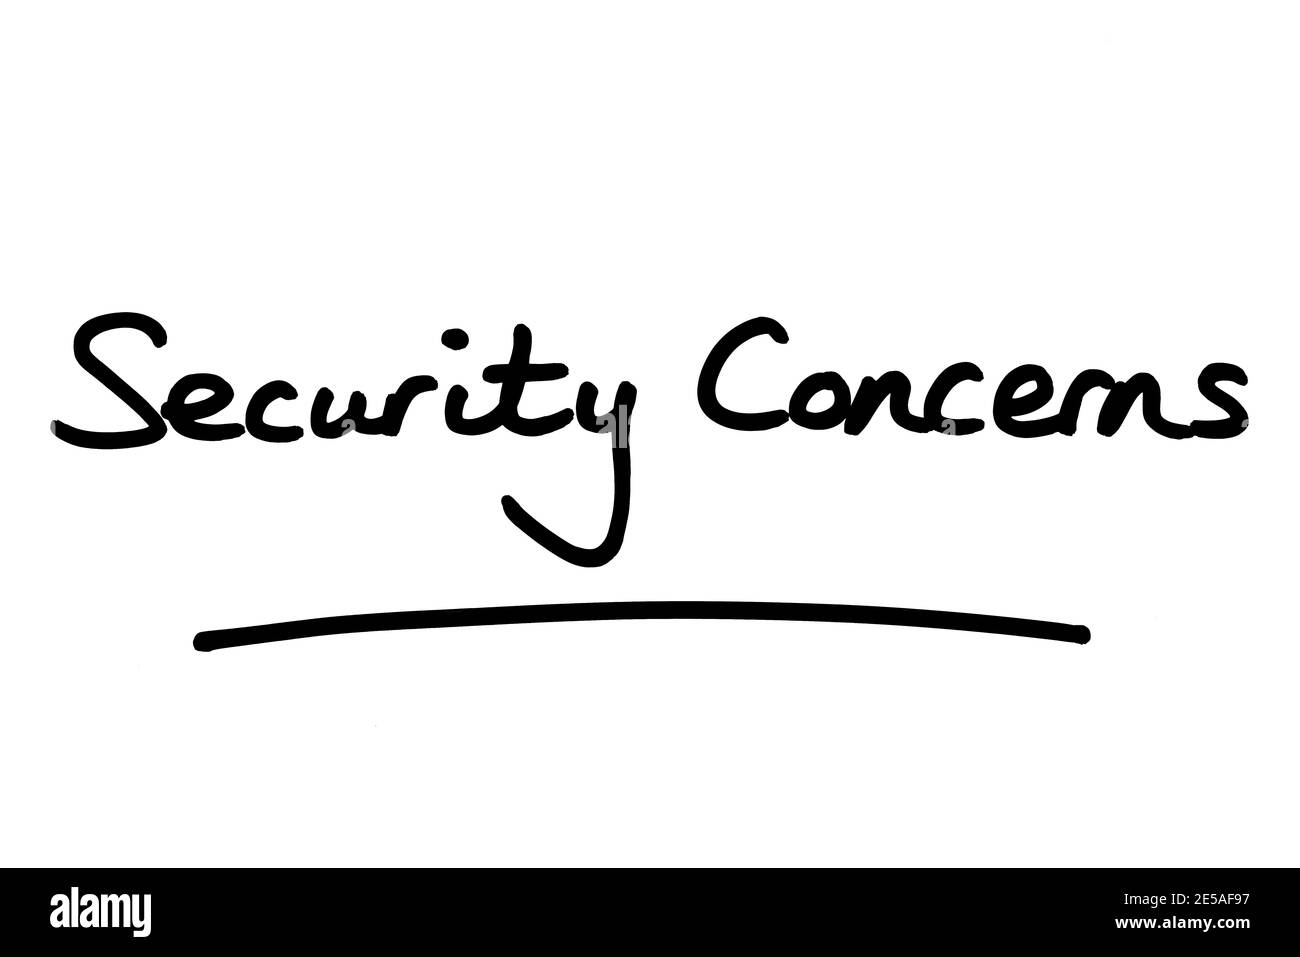 Security Concerns, handwritten on a white background. Stock Photo